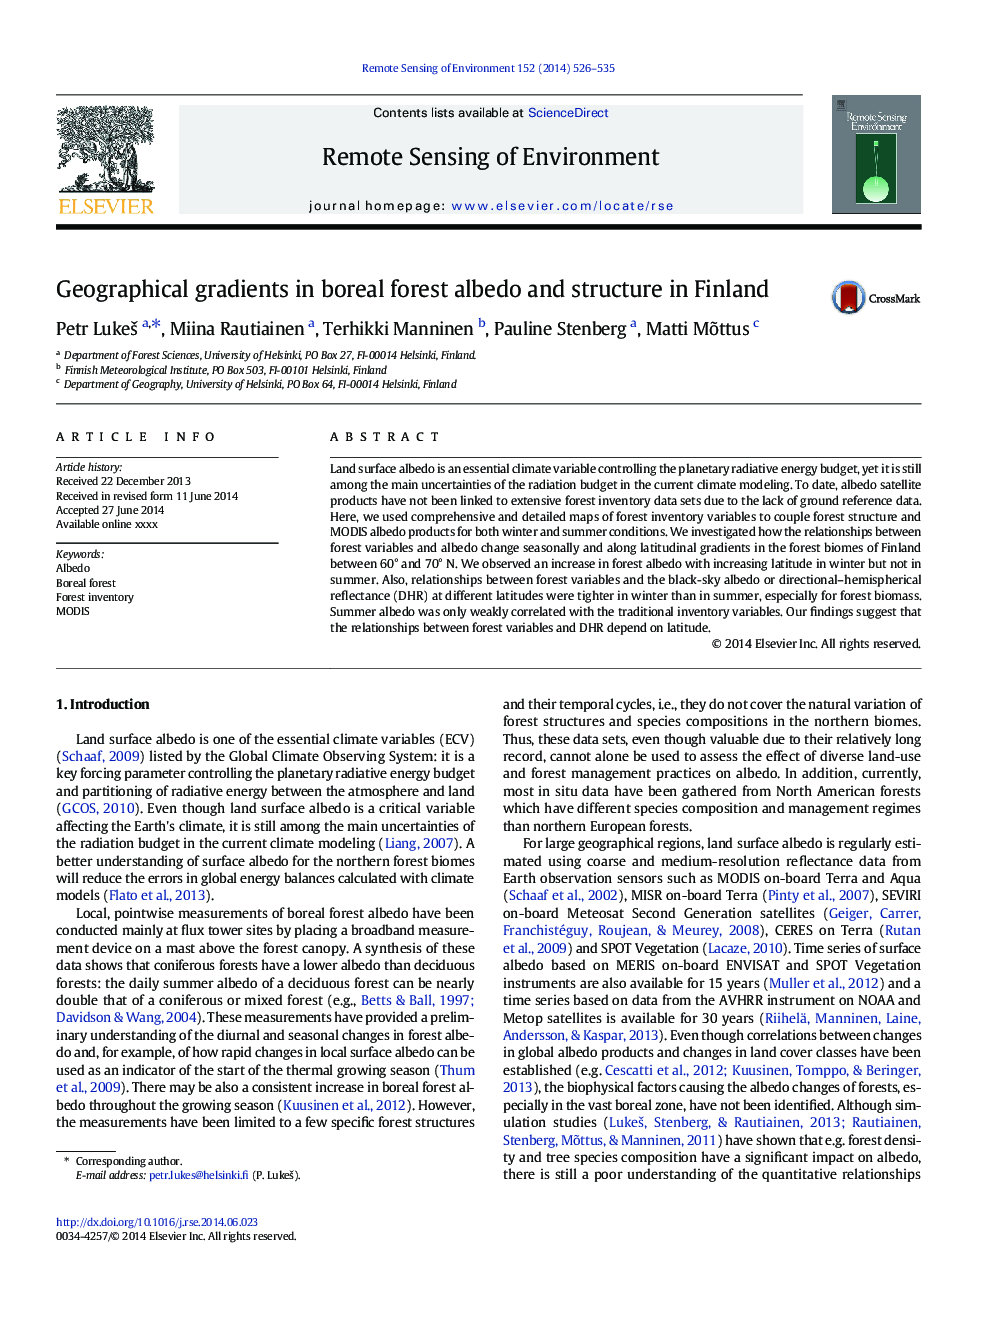 Geographical gradients in boreal forest albedo and structure in Finland